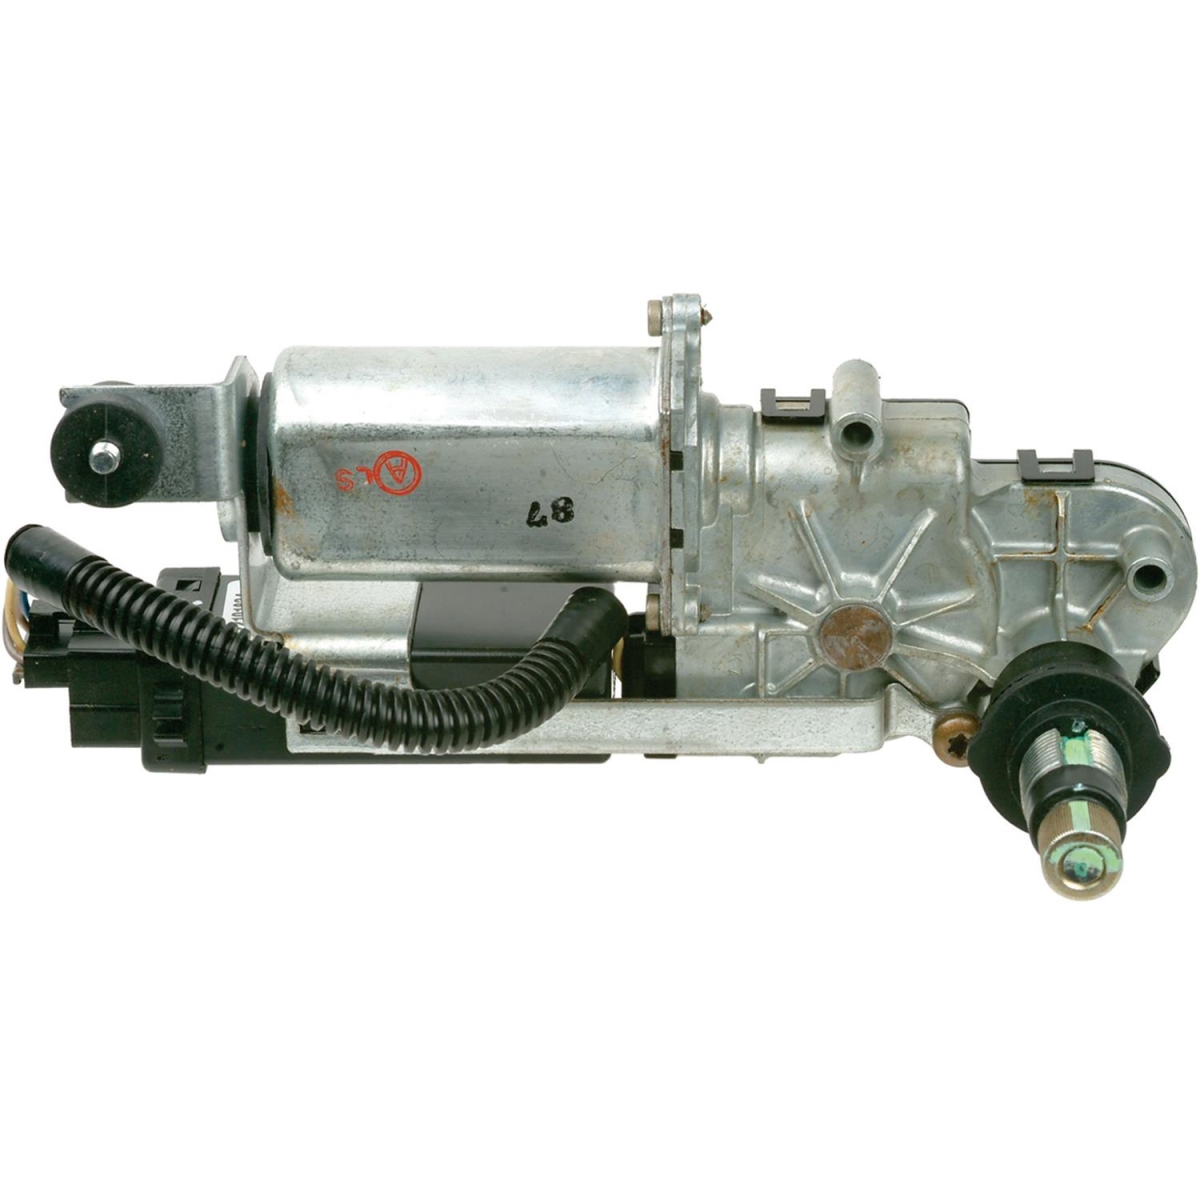 UPC 082617610438 product image for 40-1042 Windshield Wiper Motors for 1999-2000 Cadillac Escalade | upcitemdb.com